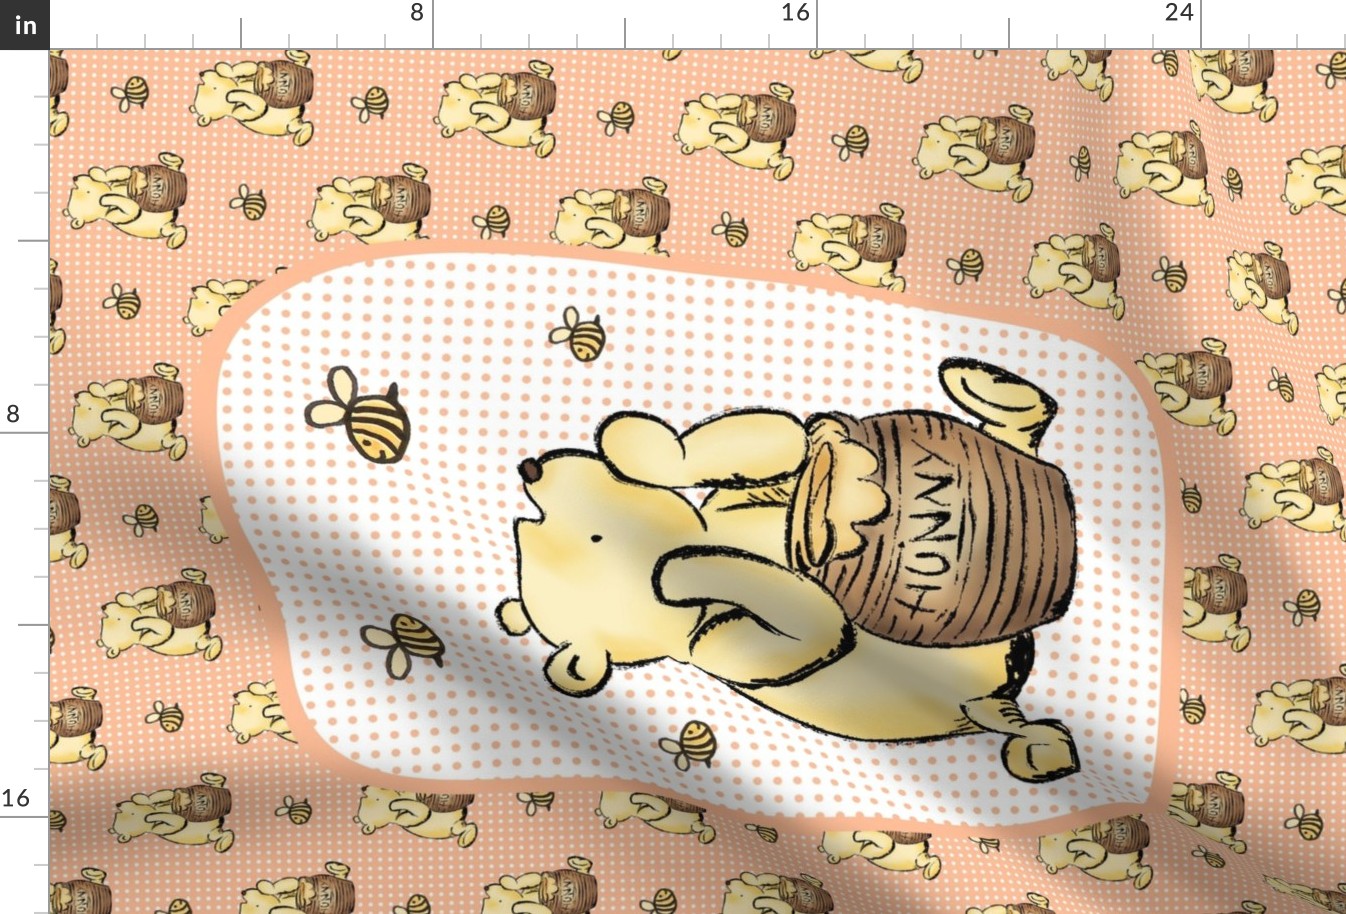 Large 27x18 Panel Classic Winnie The Pooh Hunny Pot on Peach Fuzz for Wall Hanging or Tea Towel